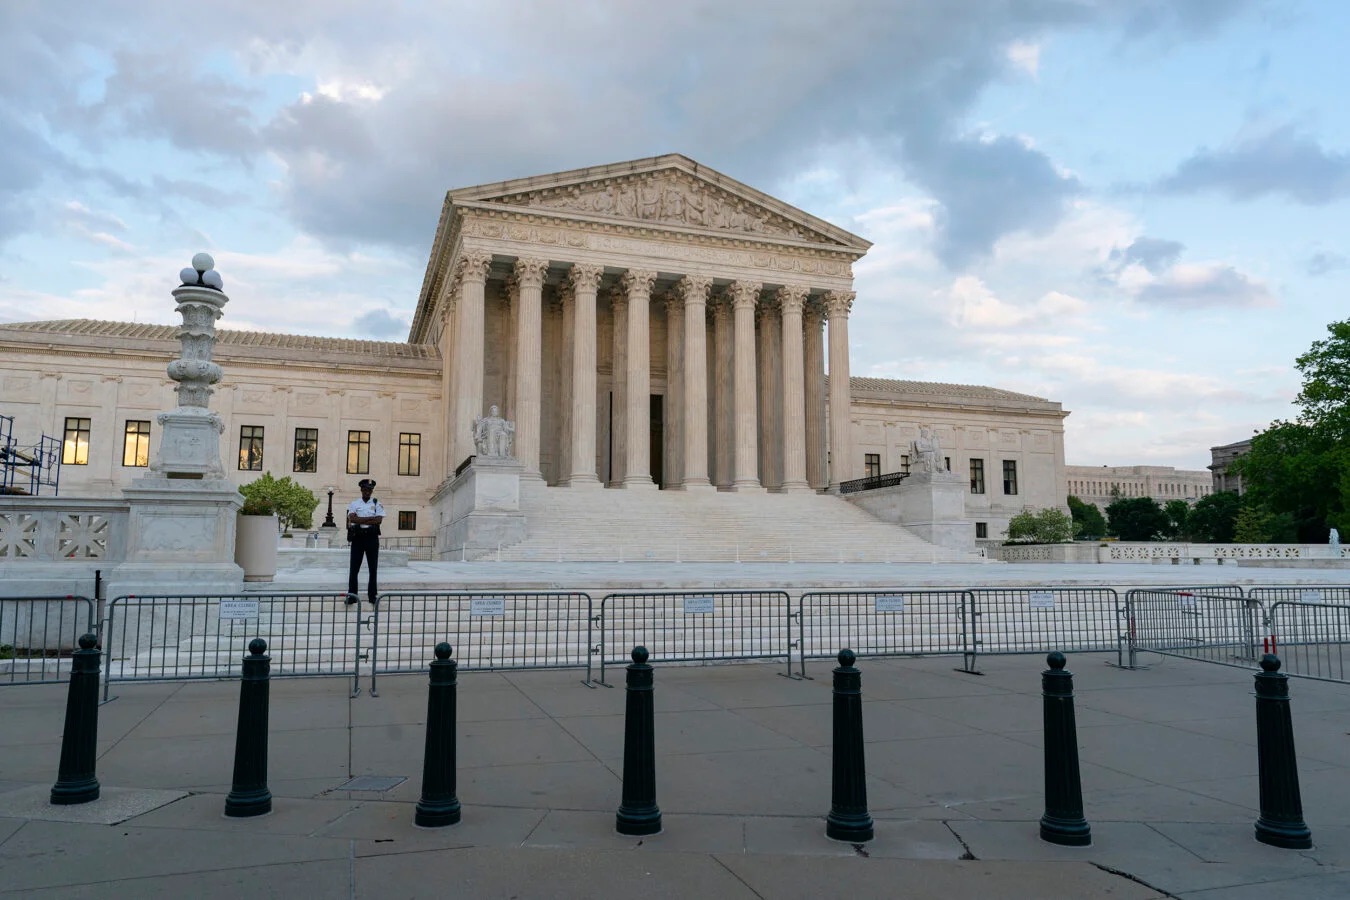 View of Supreme Court exterior with guard